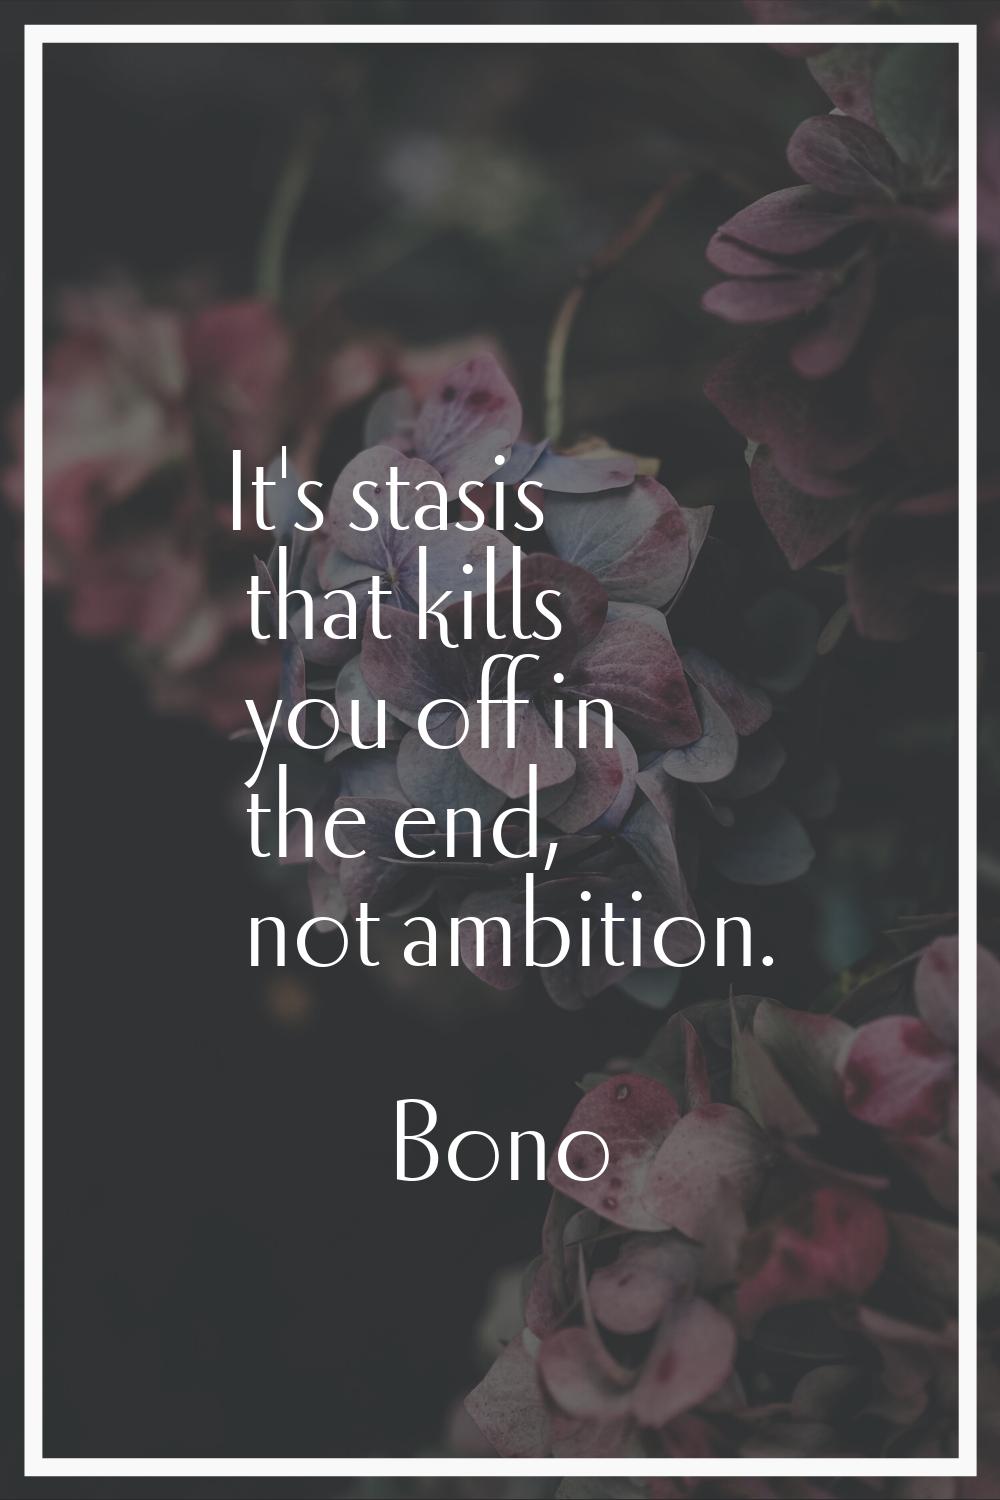 It's stasis that kills you off in the end, not ambition.